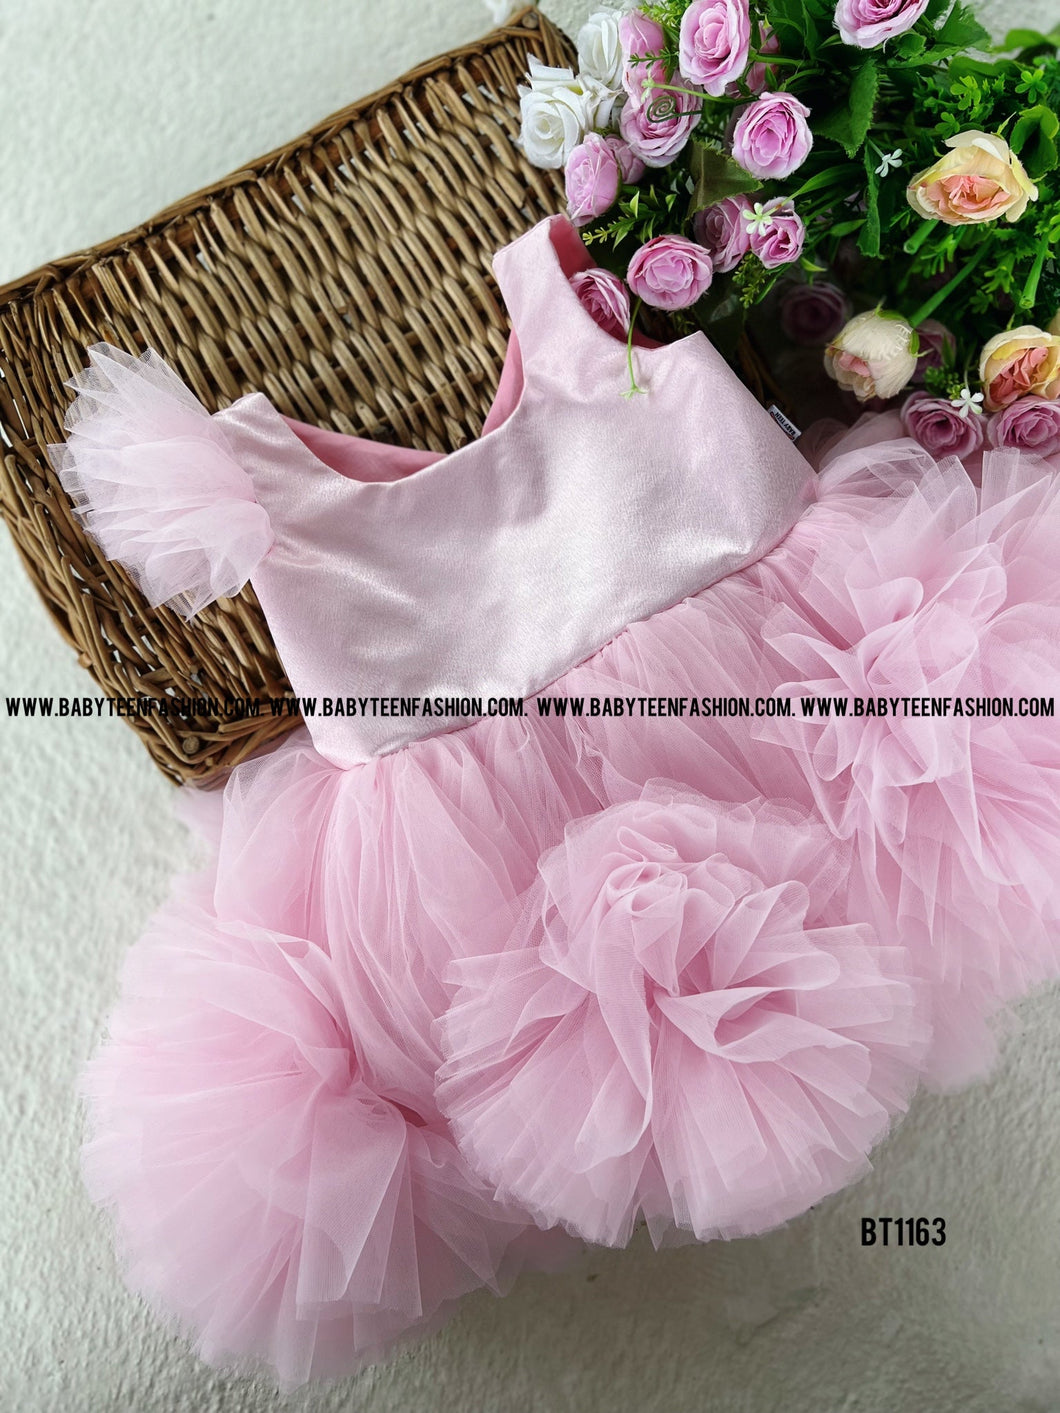 BT1163 Ballerina Blush Frolic Dress – Elegance and Fun for Your Little One's Big Day